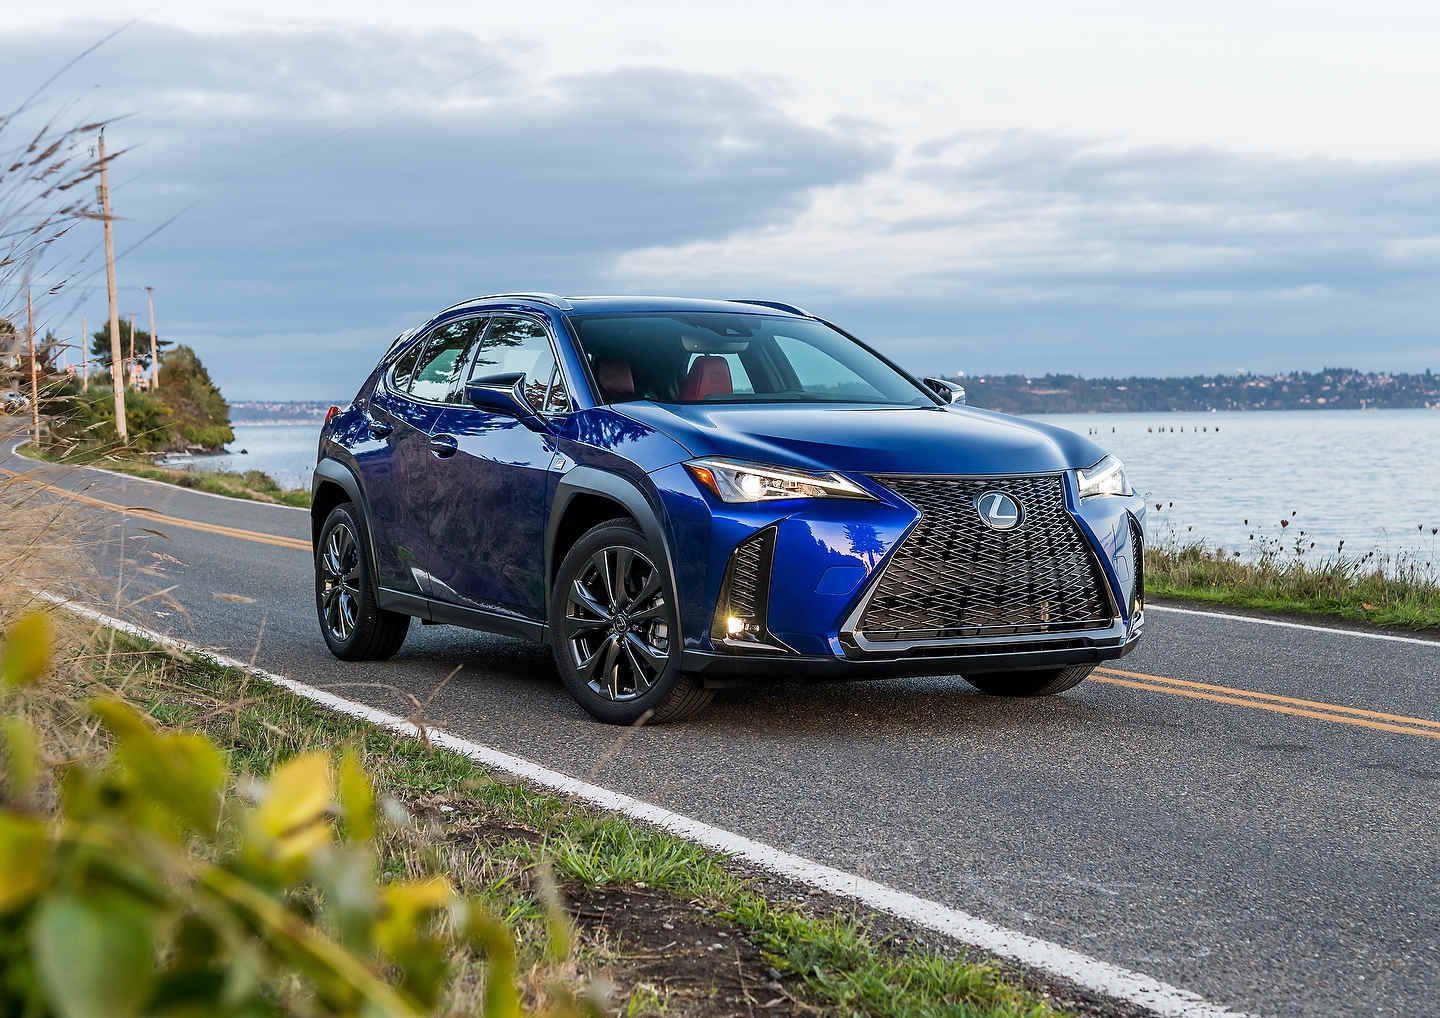 What Are the Differences Between the Lexus UX 200 and UX 250 h?